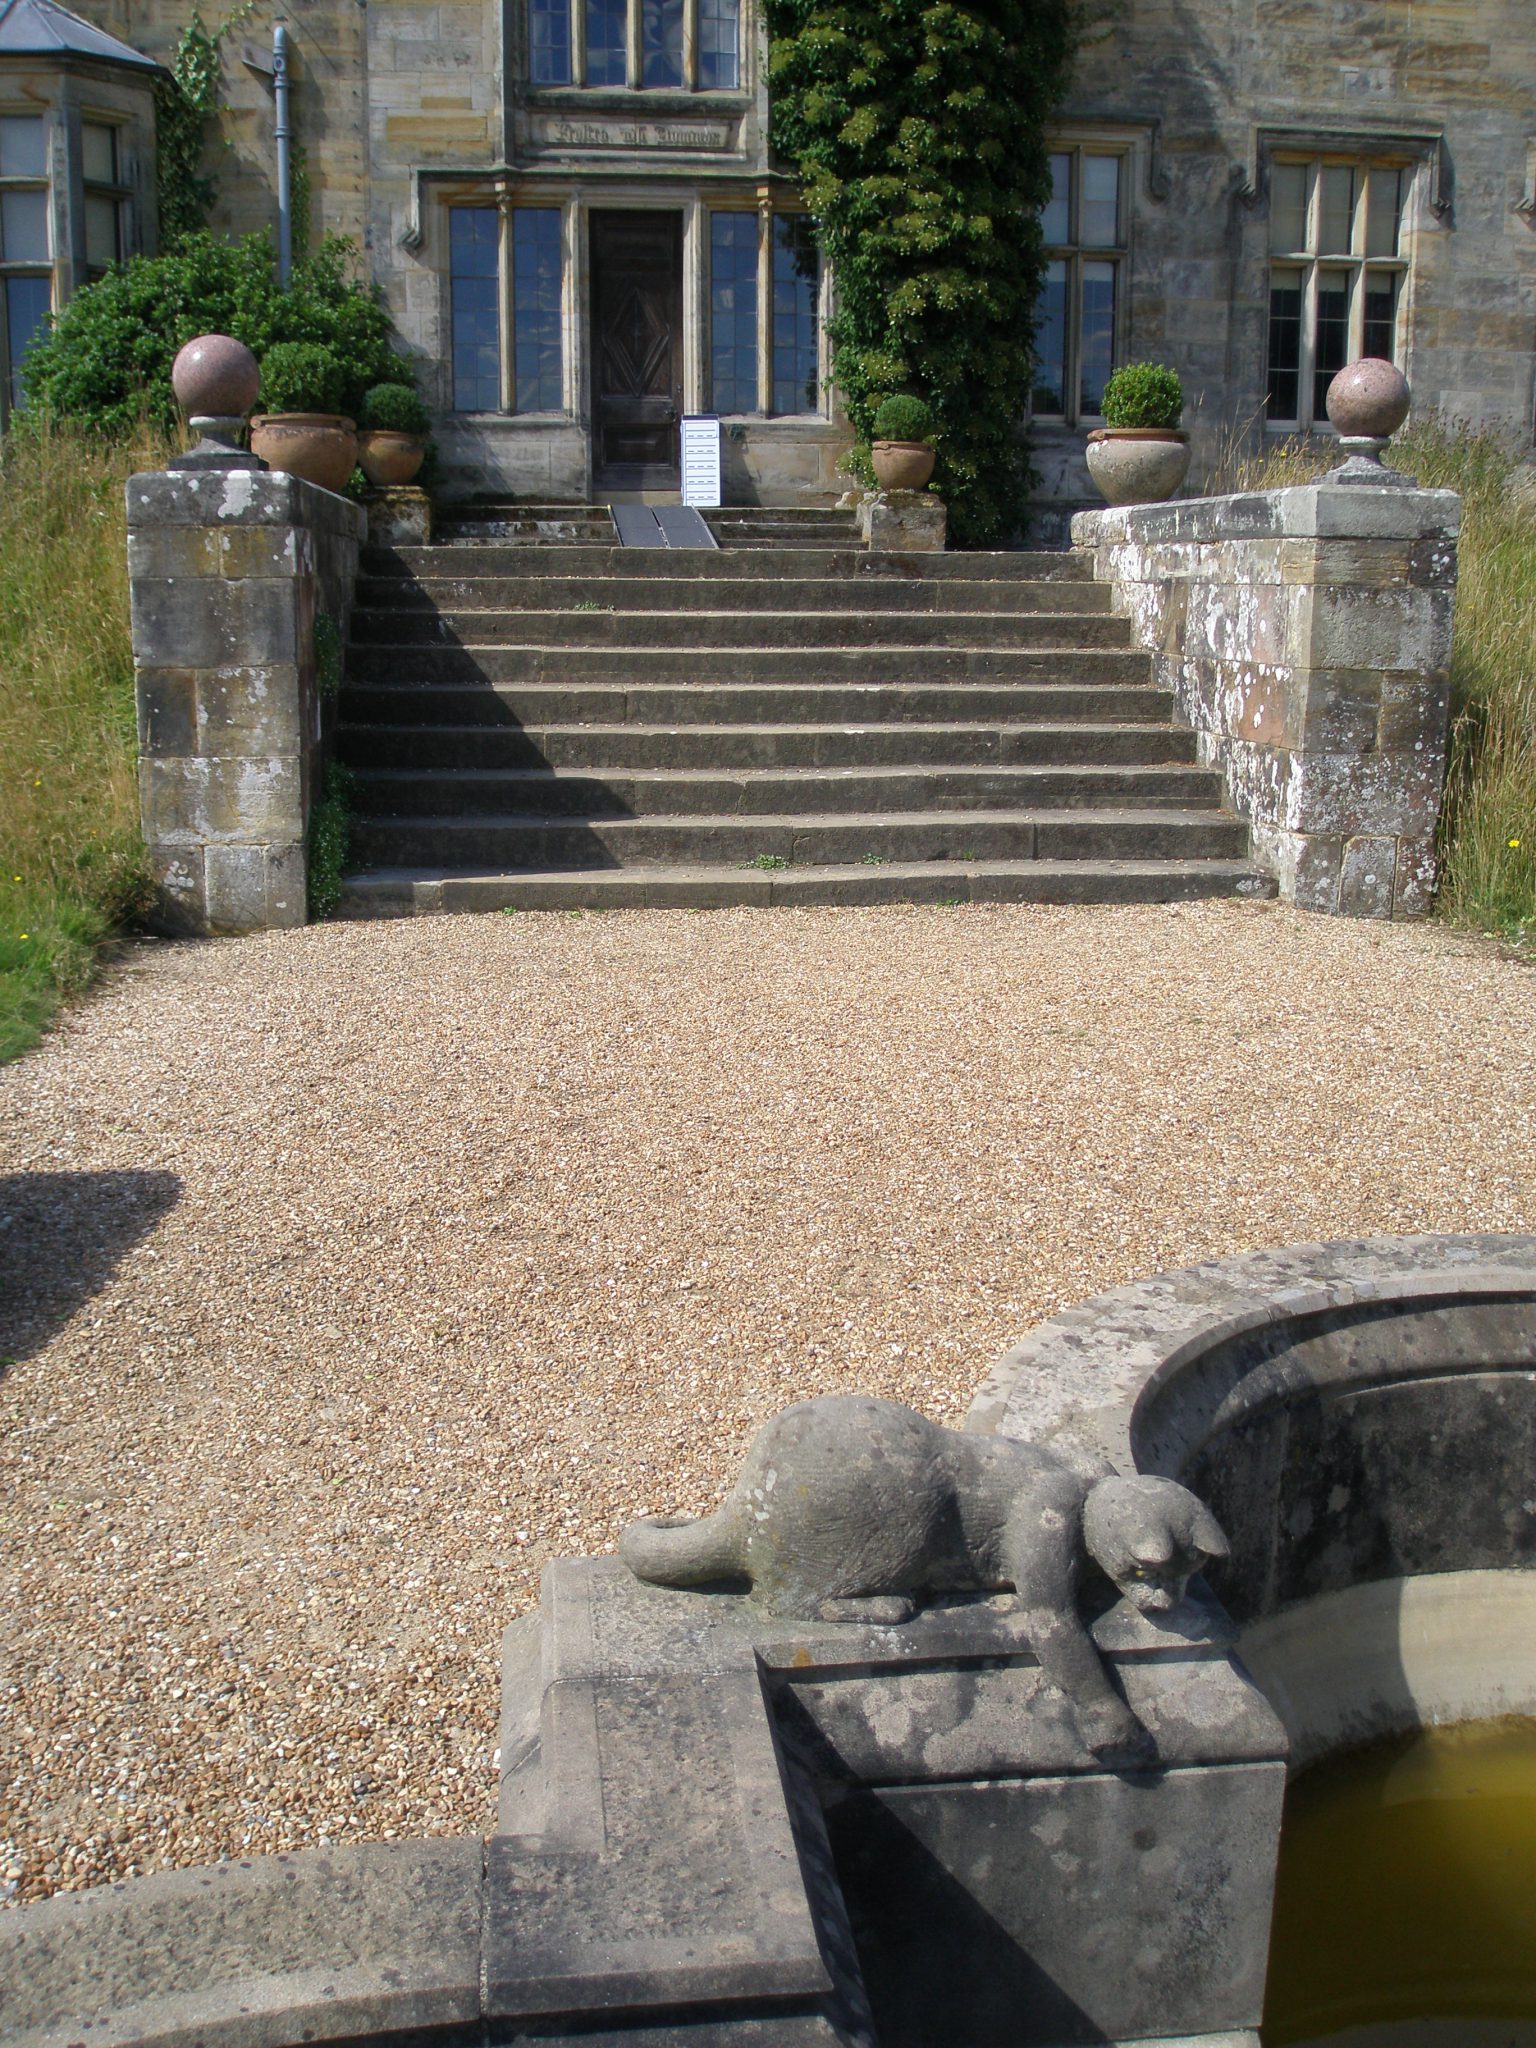 A Stone Kitten, on the Garden Front Terrace, with a view back toward the door to the Garden Lobby of the New House.